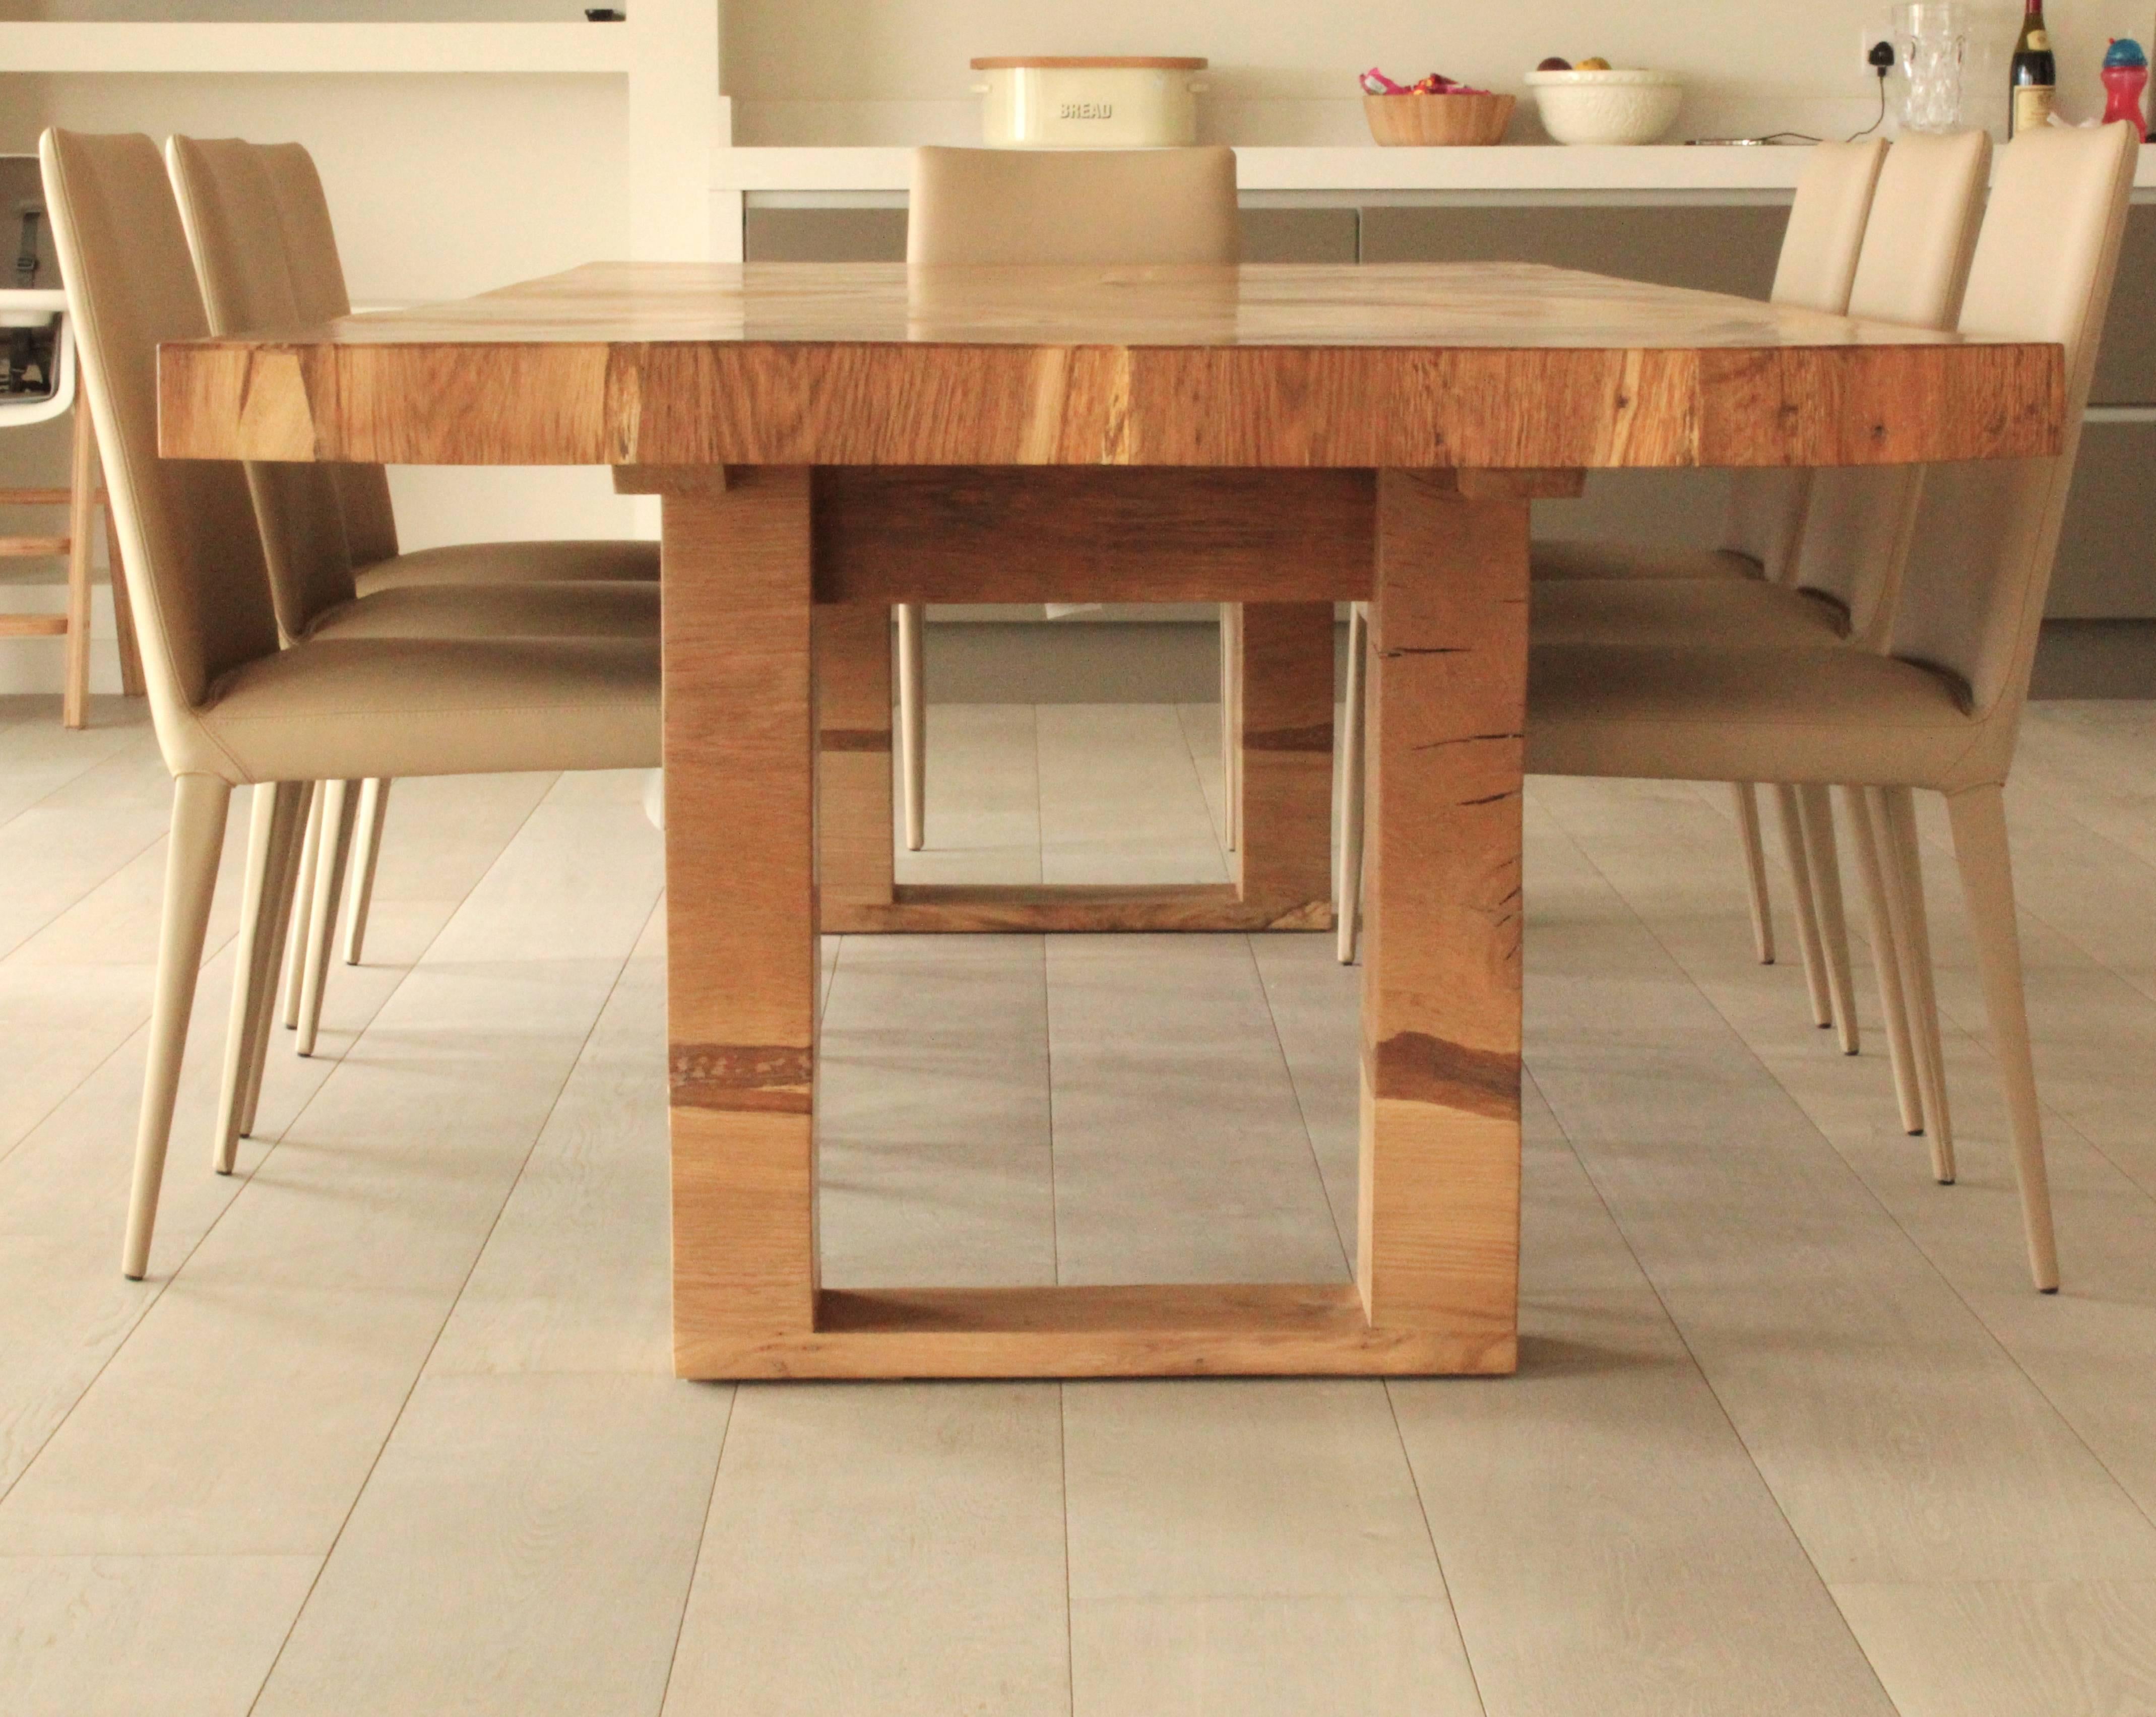 English oak dining table commissioned for a private client's lakeside house in the Cotswolds, England. Made from several slabs of live edge oak, the timber grain and figure is different for each tabletop.
The natural shapes and patterns of the live